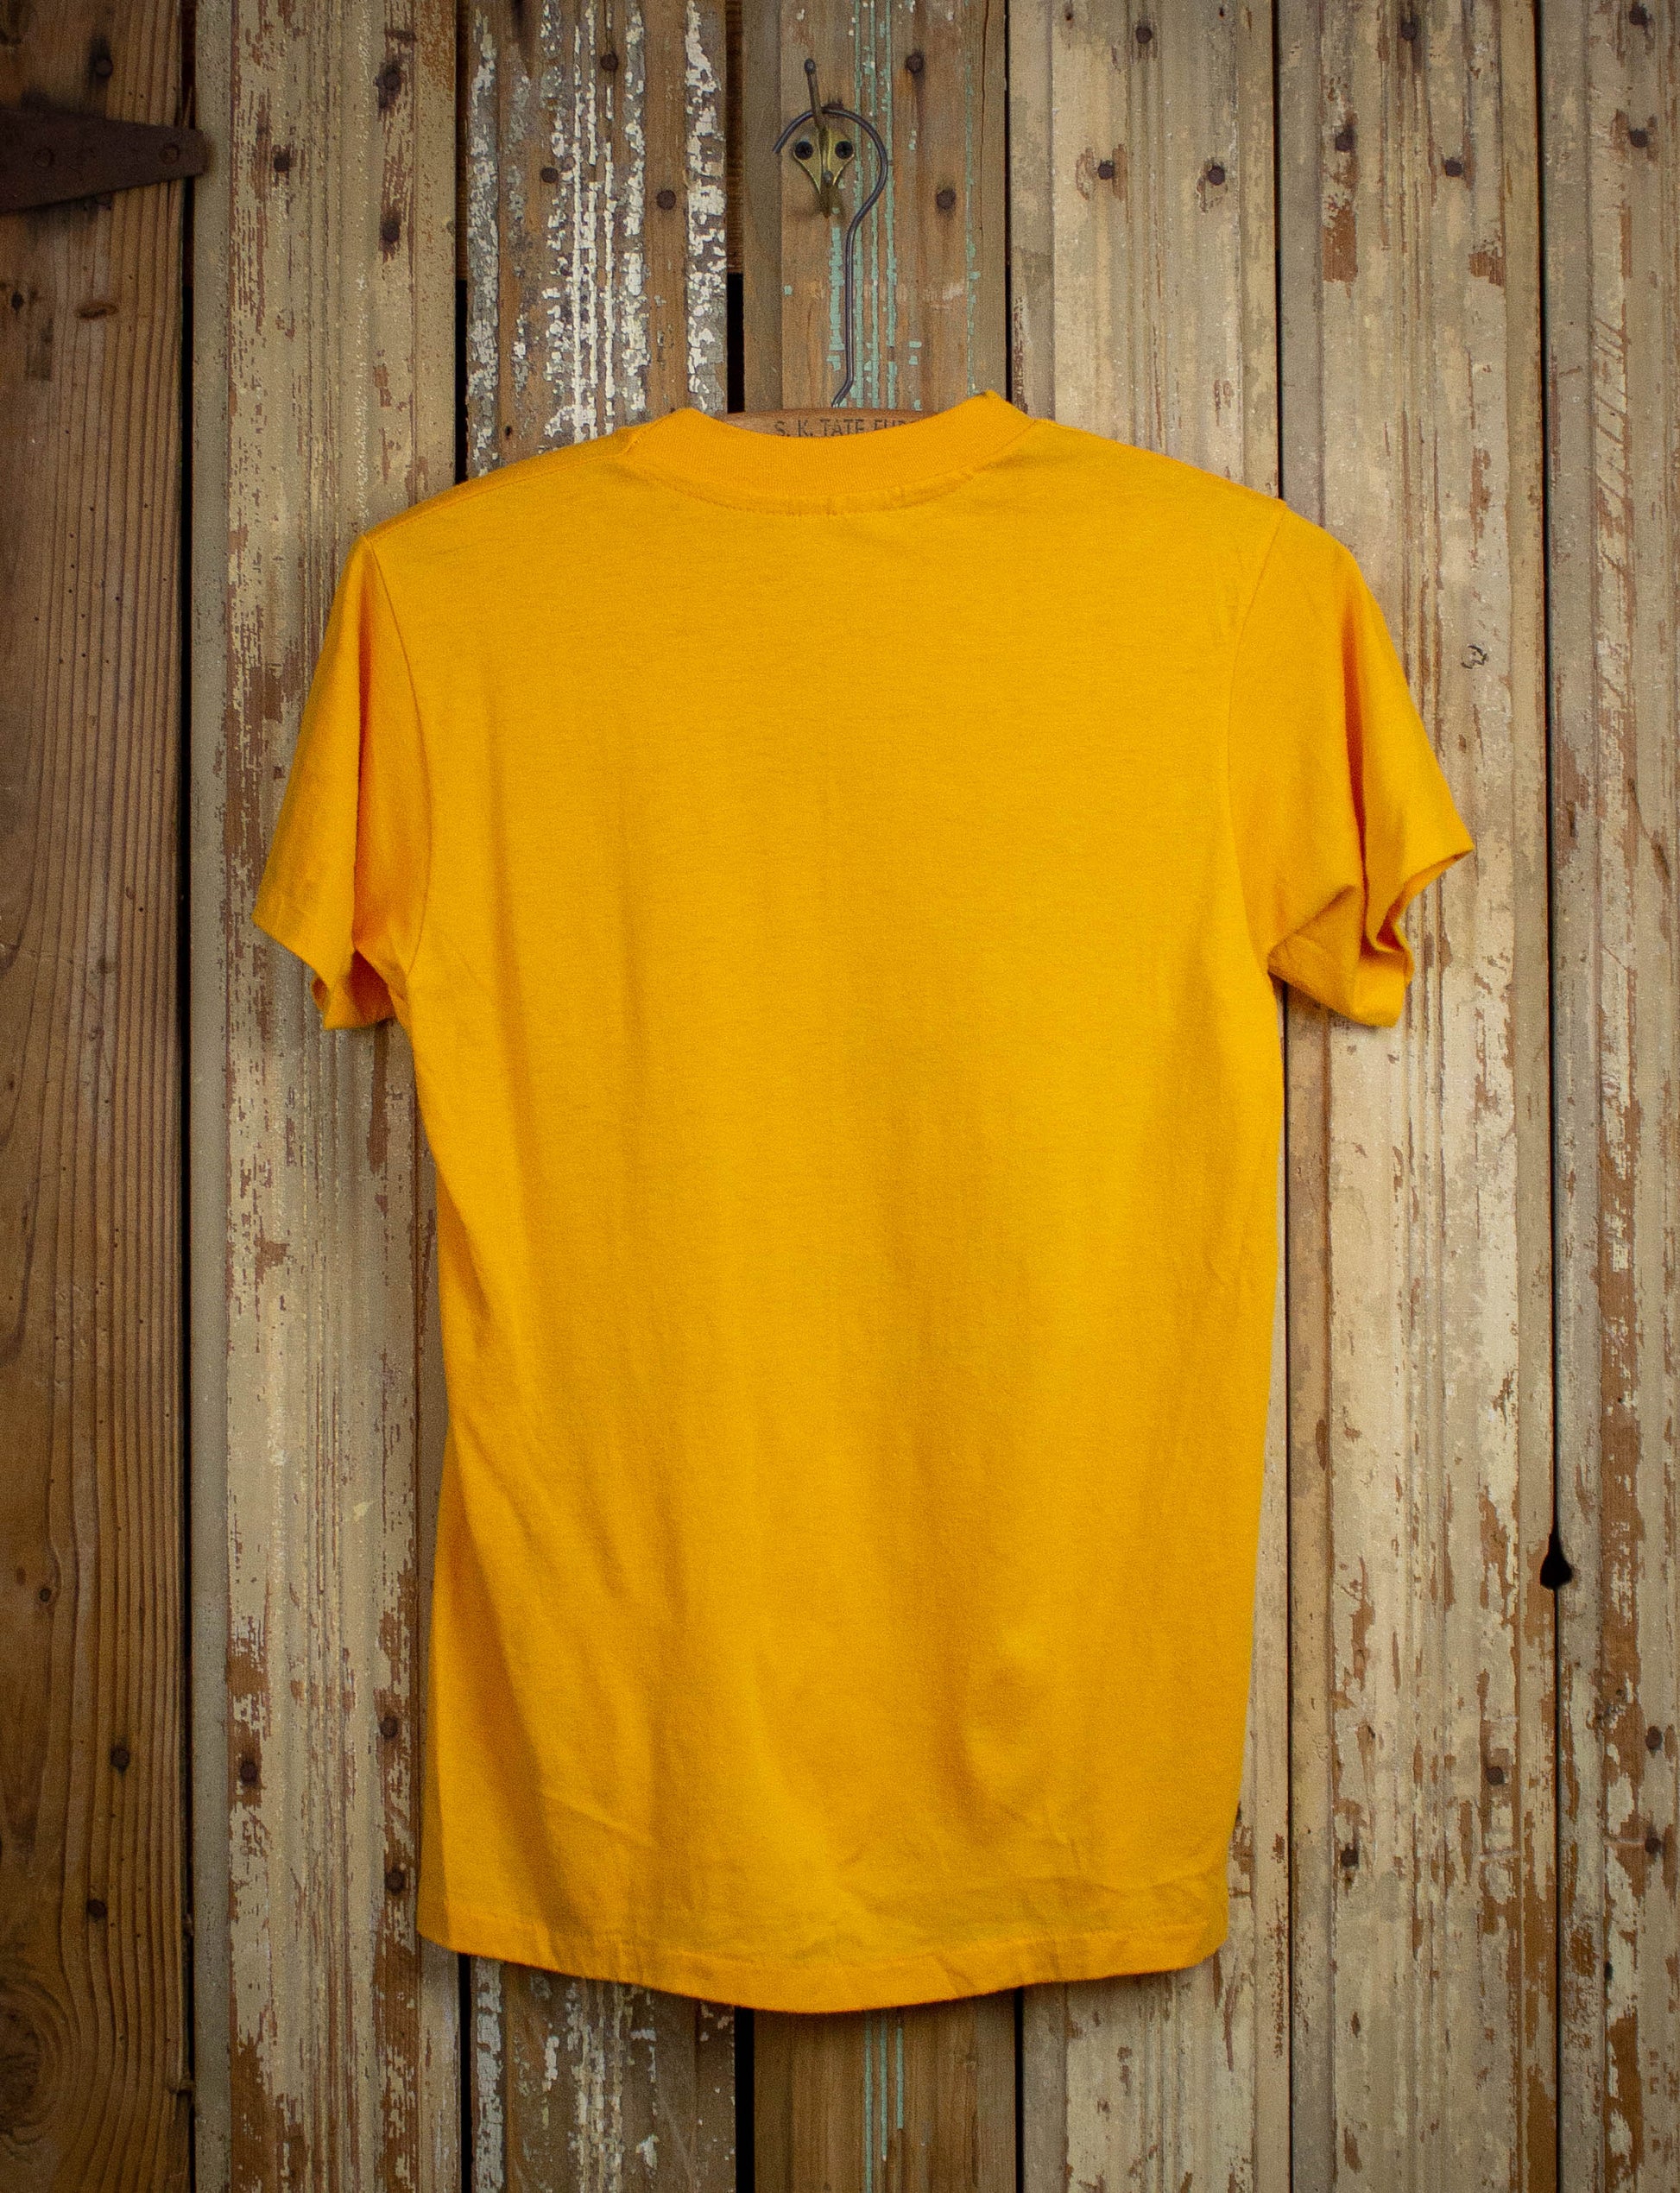 Vintage Deep Creek Tube Center Graphic T Shirt 80s Yellow Small